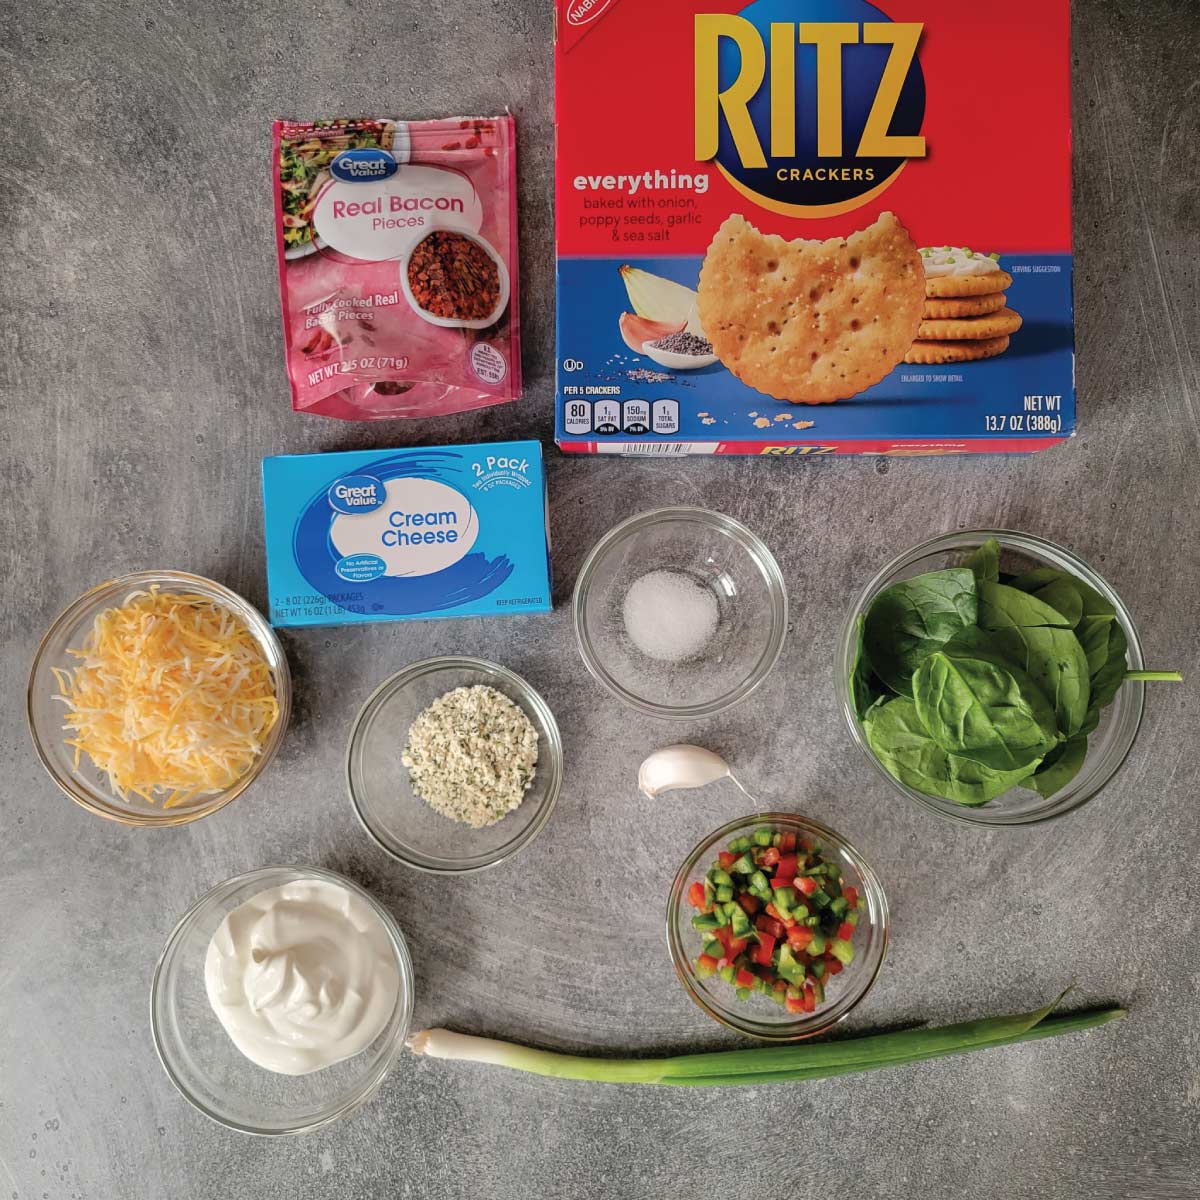 Ingredients for cheeseballs - real bacon pieces, Ritz crackers, cream cheese, salt, spinach, chopped red and green peppers, garlic clove, ranch seasoning, shredded cheese, sour cream and 1 scallion.